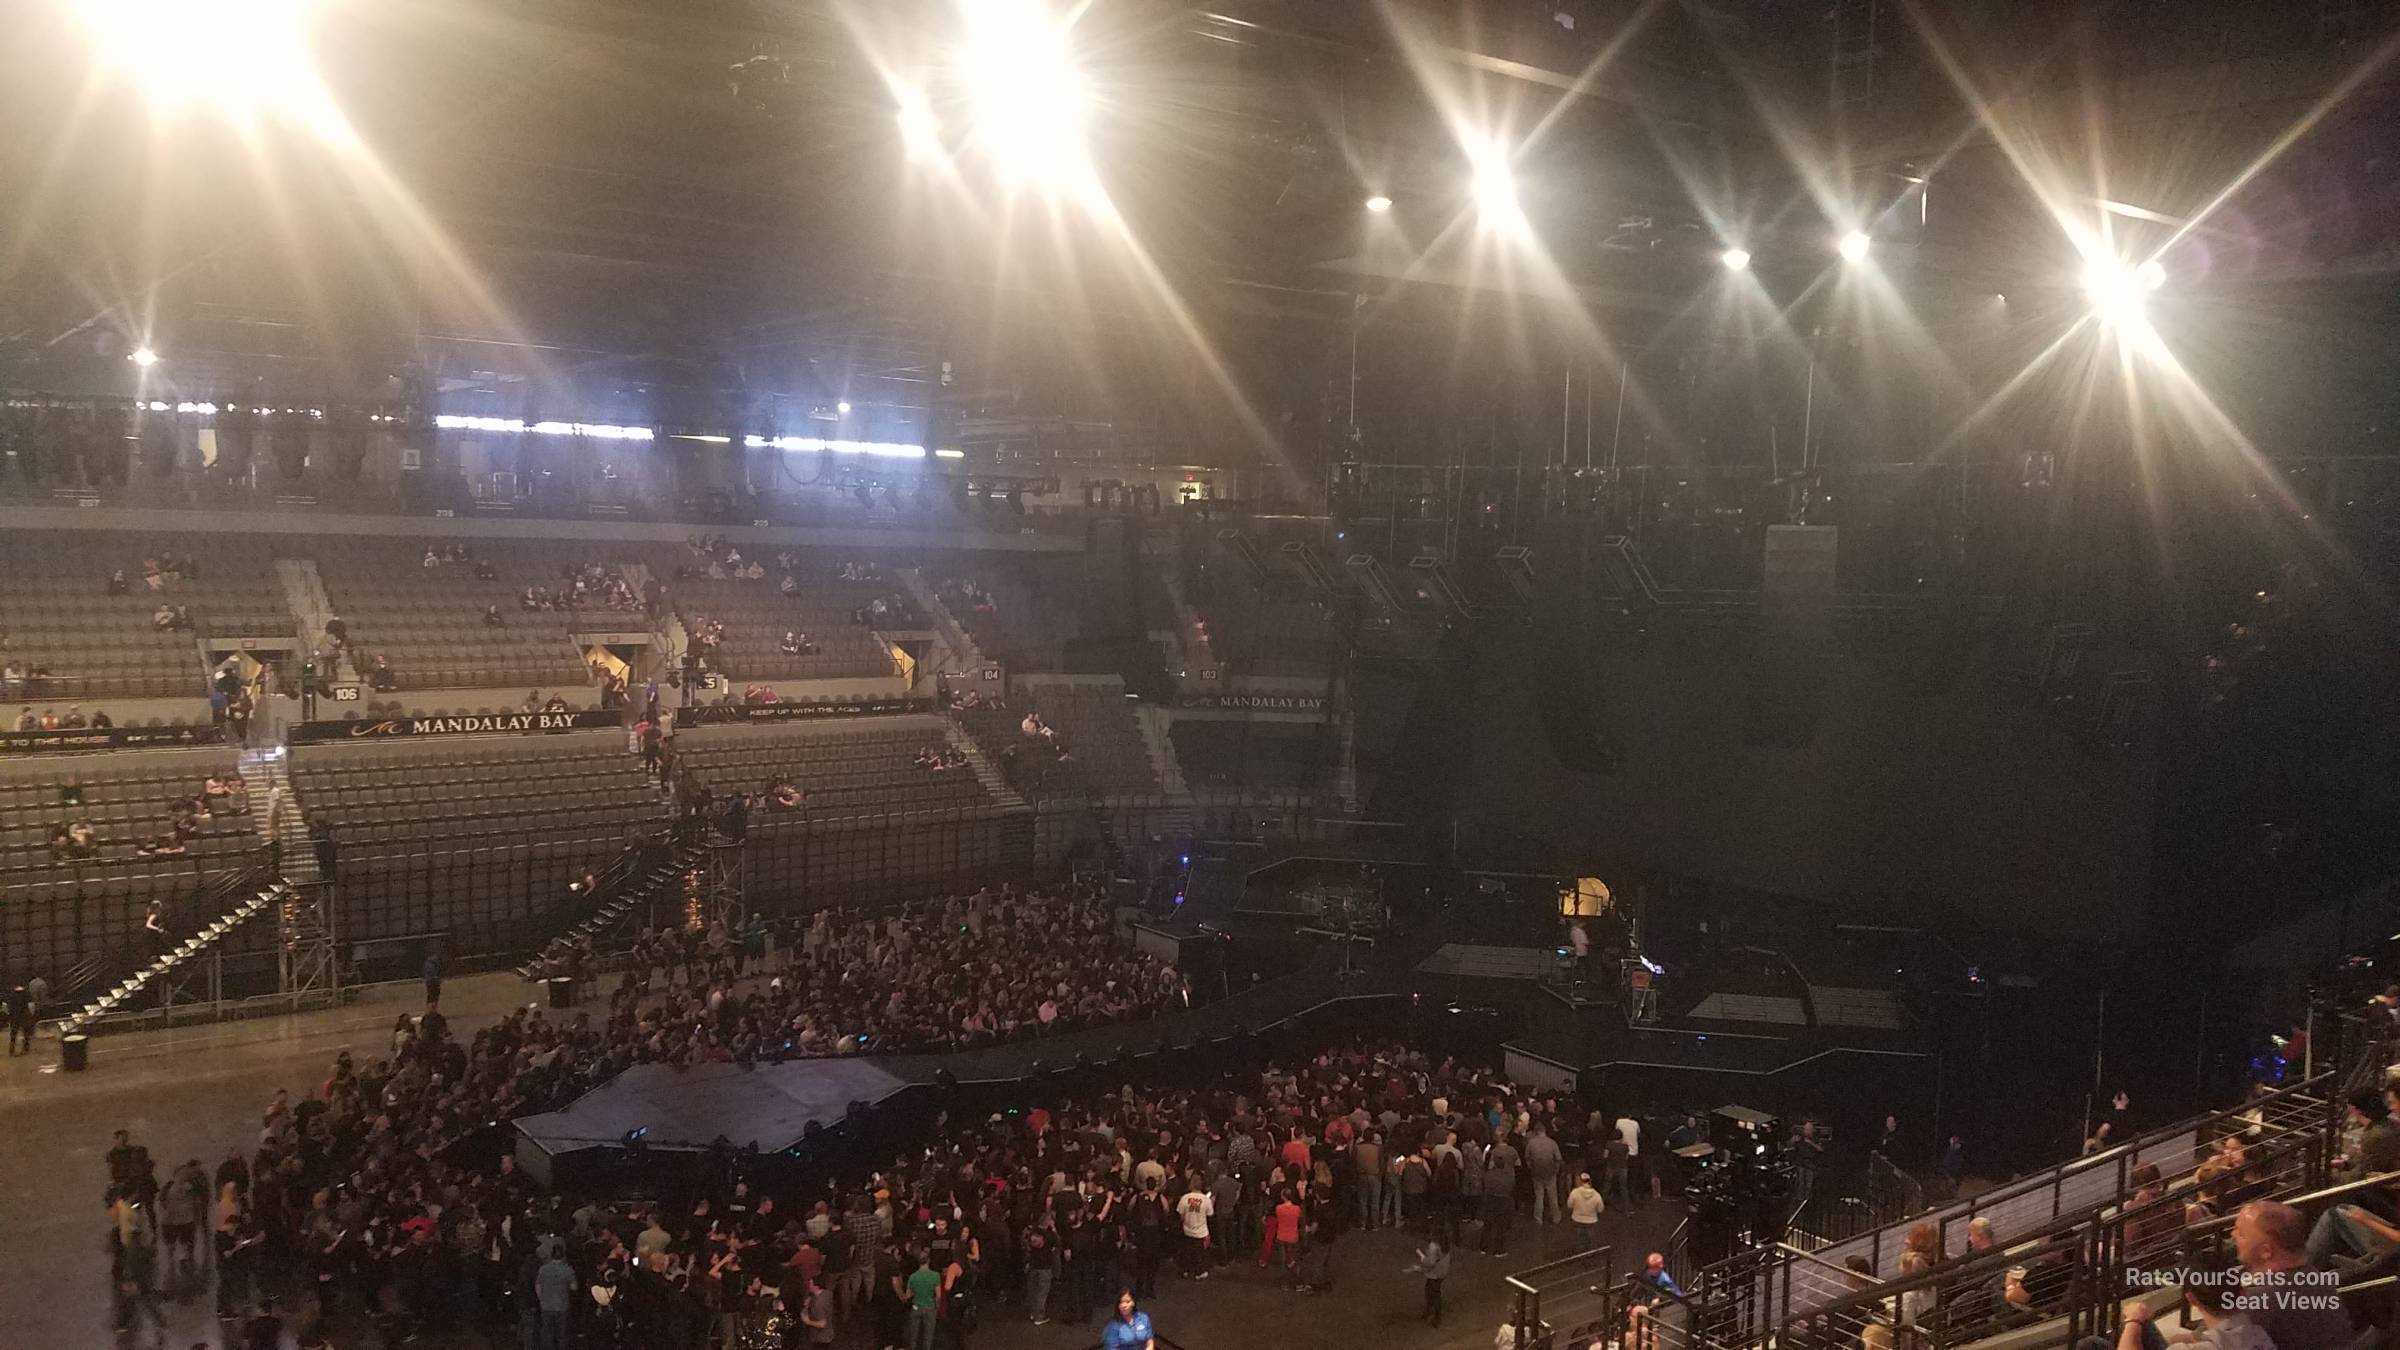 section 319 seat view  for concert - michelob ultra arena